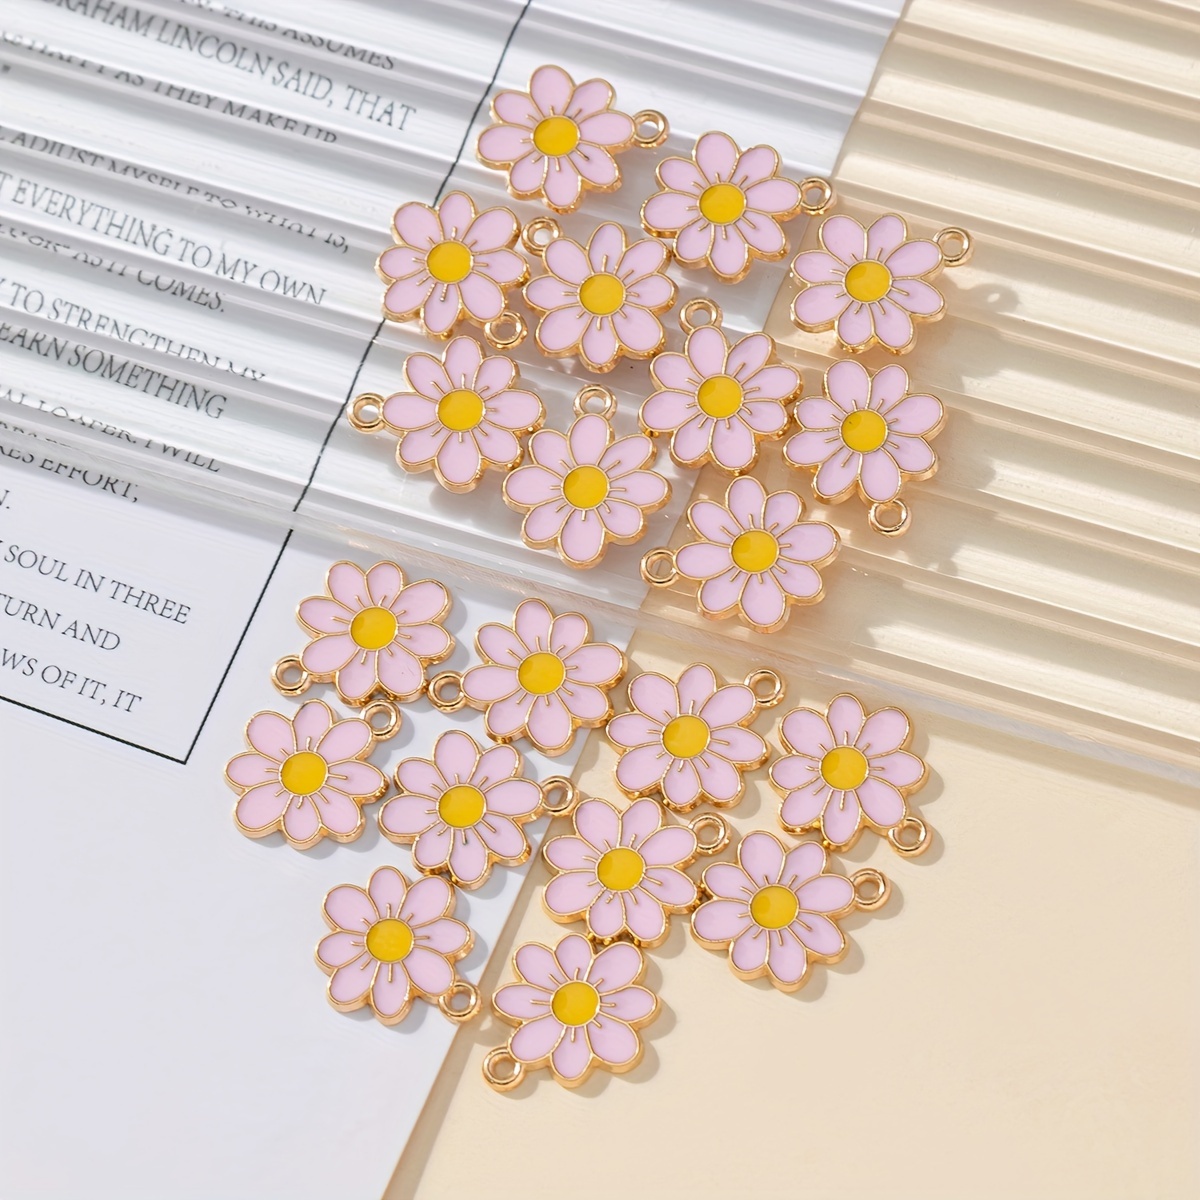 Honbay 30pcs Enamel Alloy Cute Daisy Flower Charms Pendant Bead Charms for Earrings Bracelets Necklaces Jewelry Making and DIY Crafts